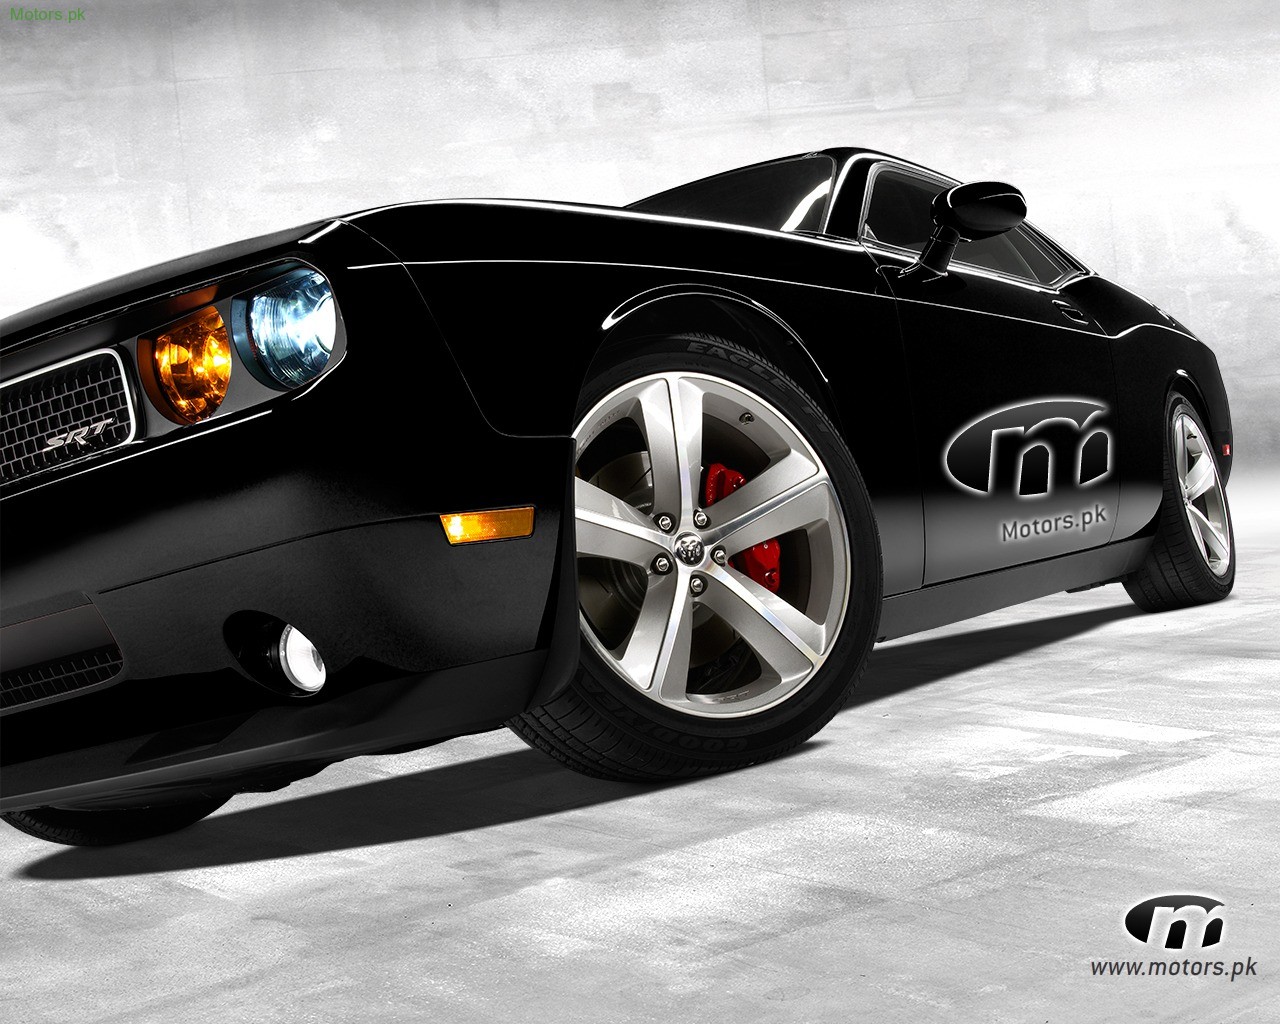 muscle car wallpapers on Ford Muscle Car Wallpaper   Motors Pk